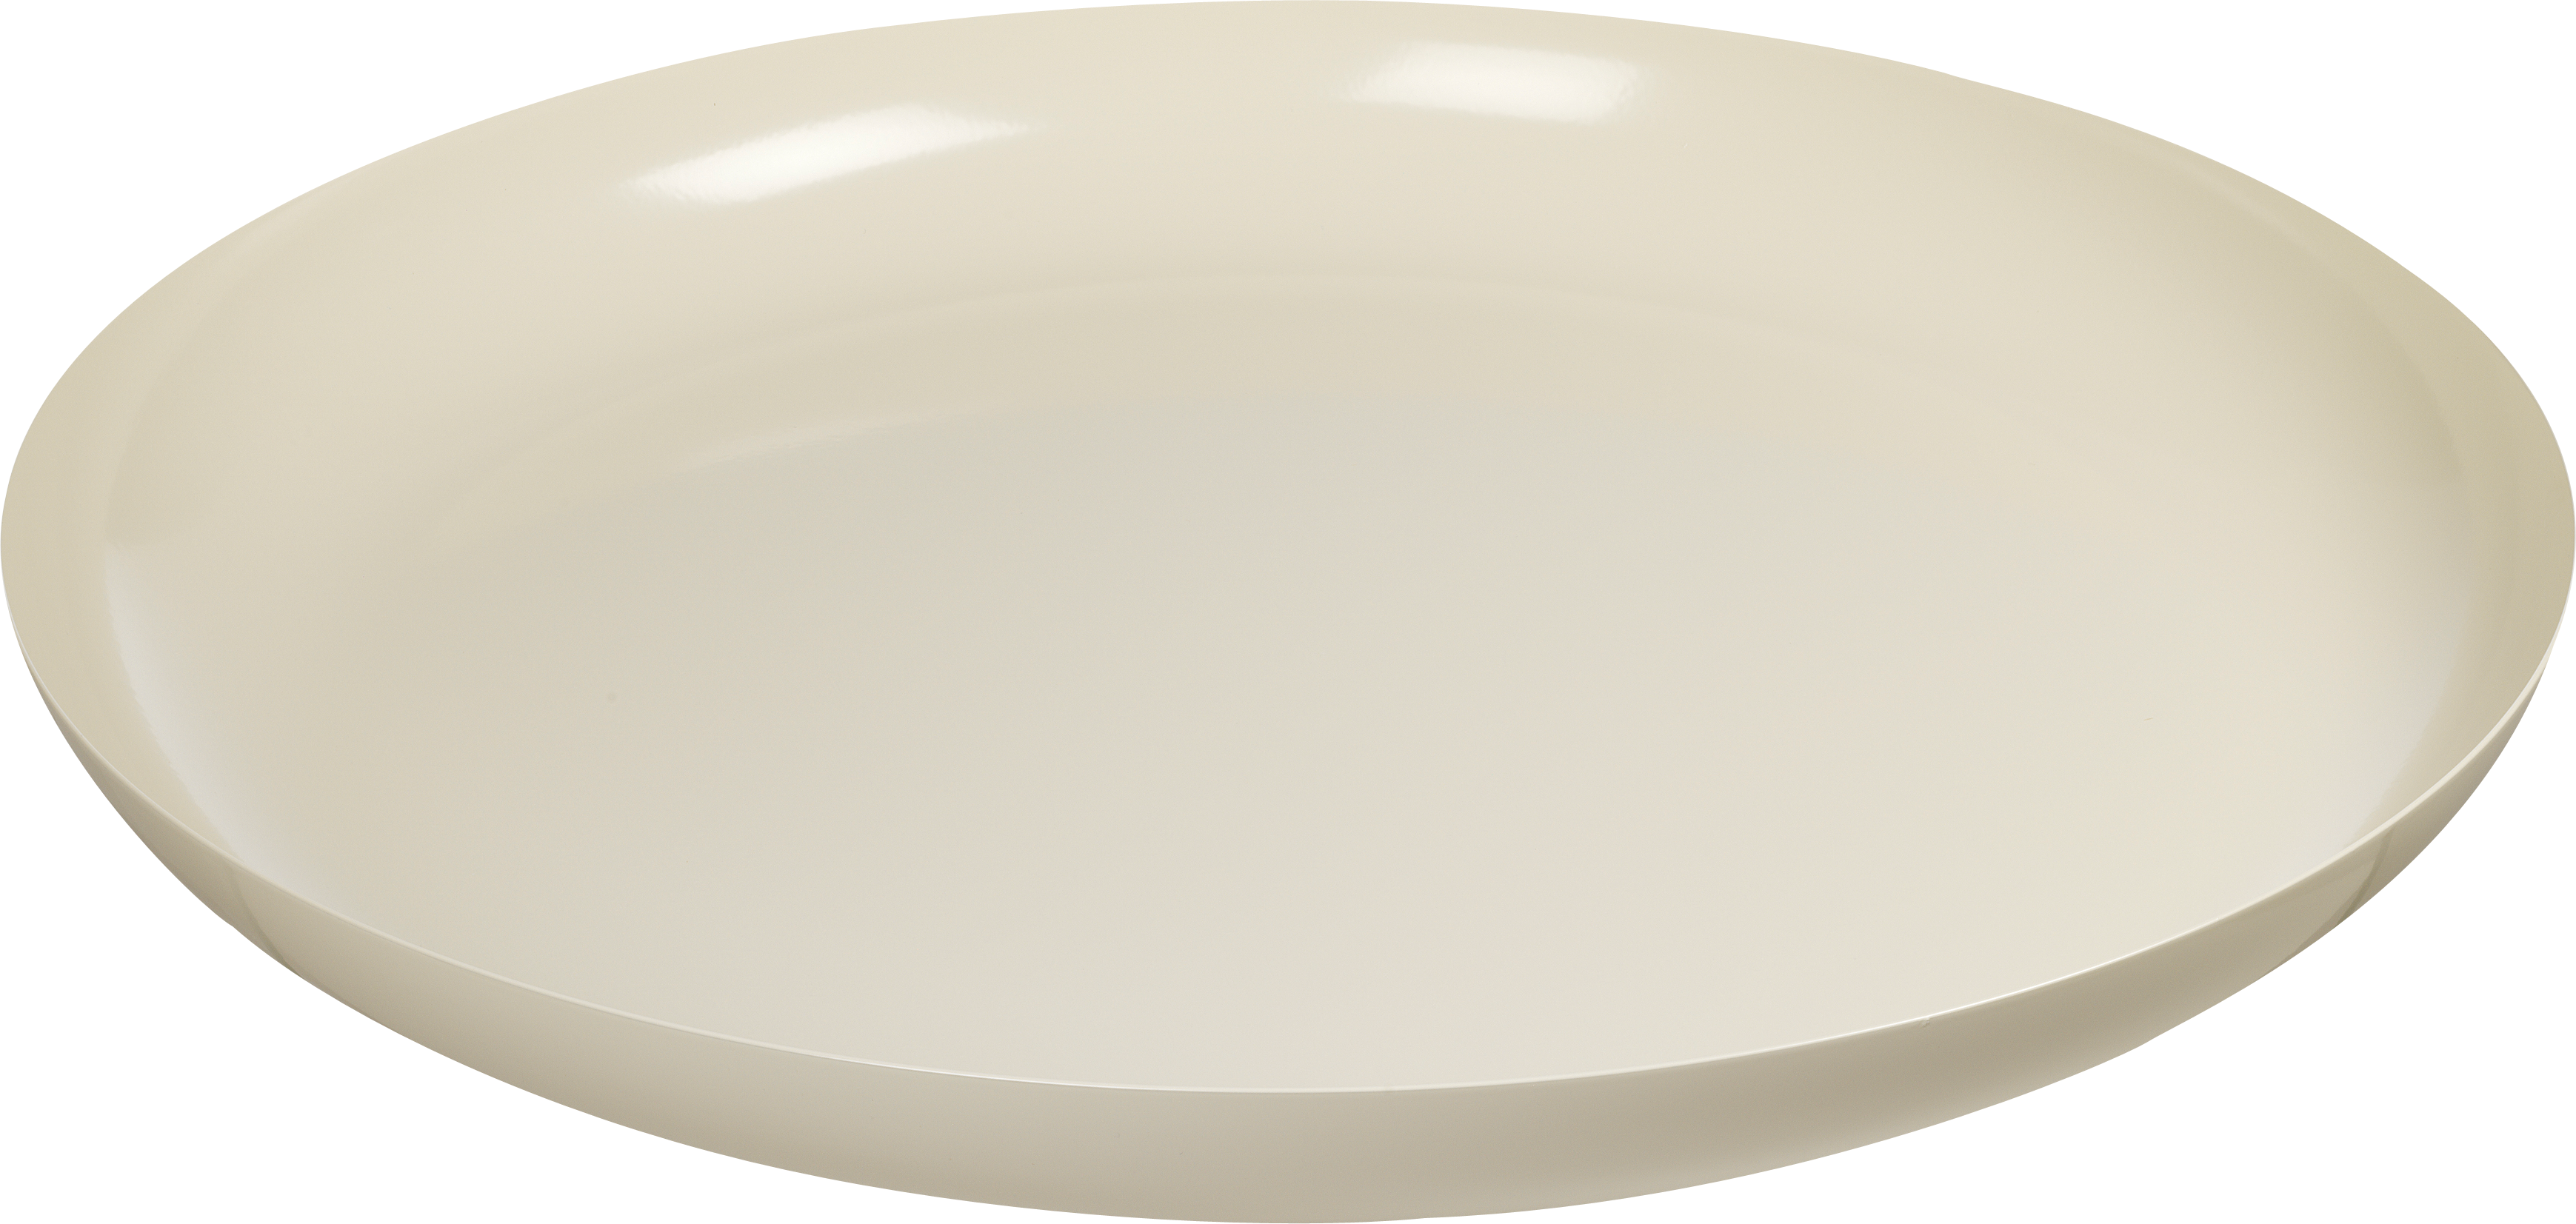 PNG Plate-PlusPNG.com-1900